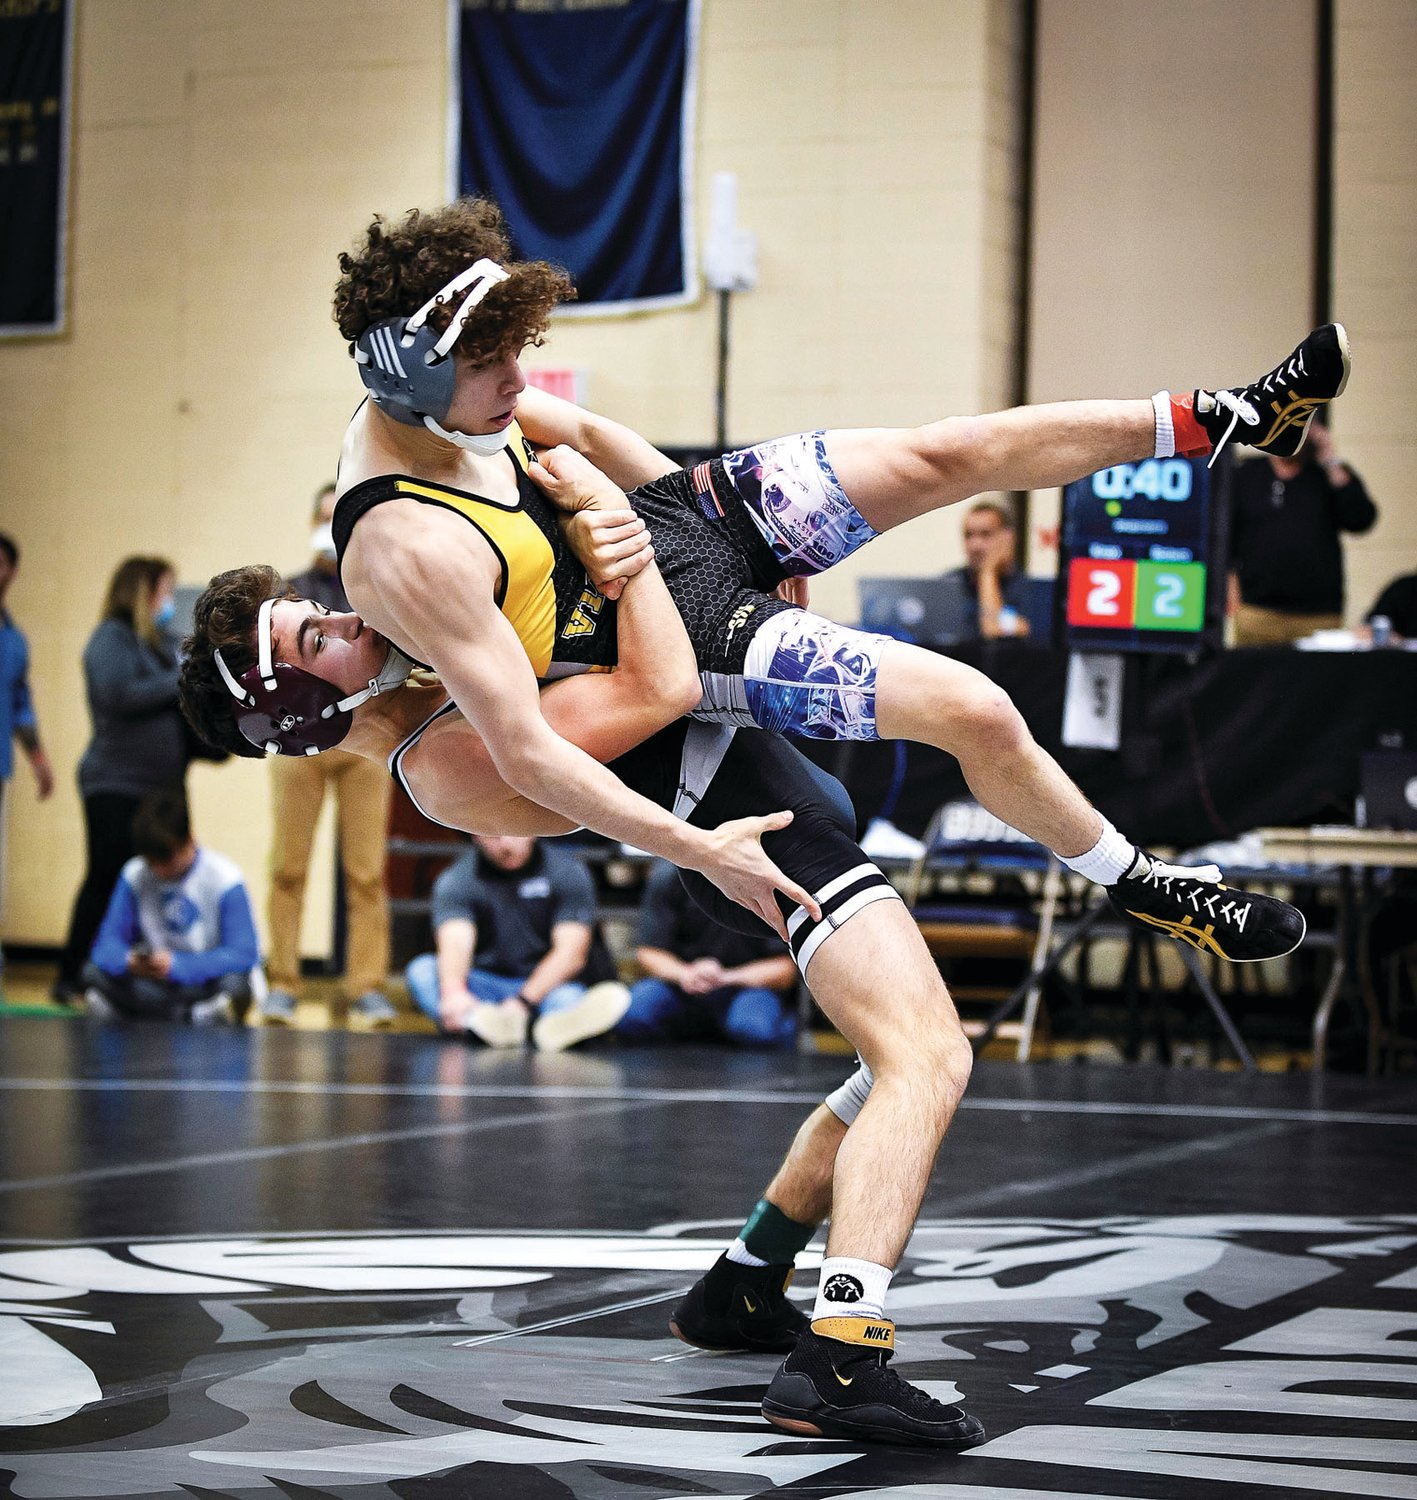 Faith Christian Academy’s Gauge Botero picks up and slams Anthony Knox of St. John Vianney, but Knox would recover and score a last-second point to edge Botero 9-8 in a 113-pound match.